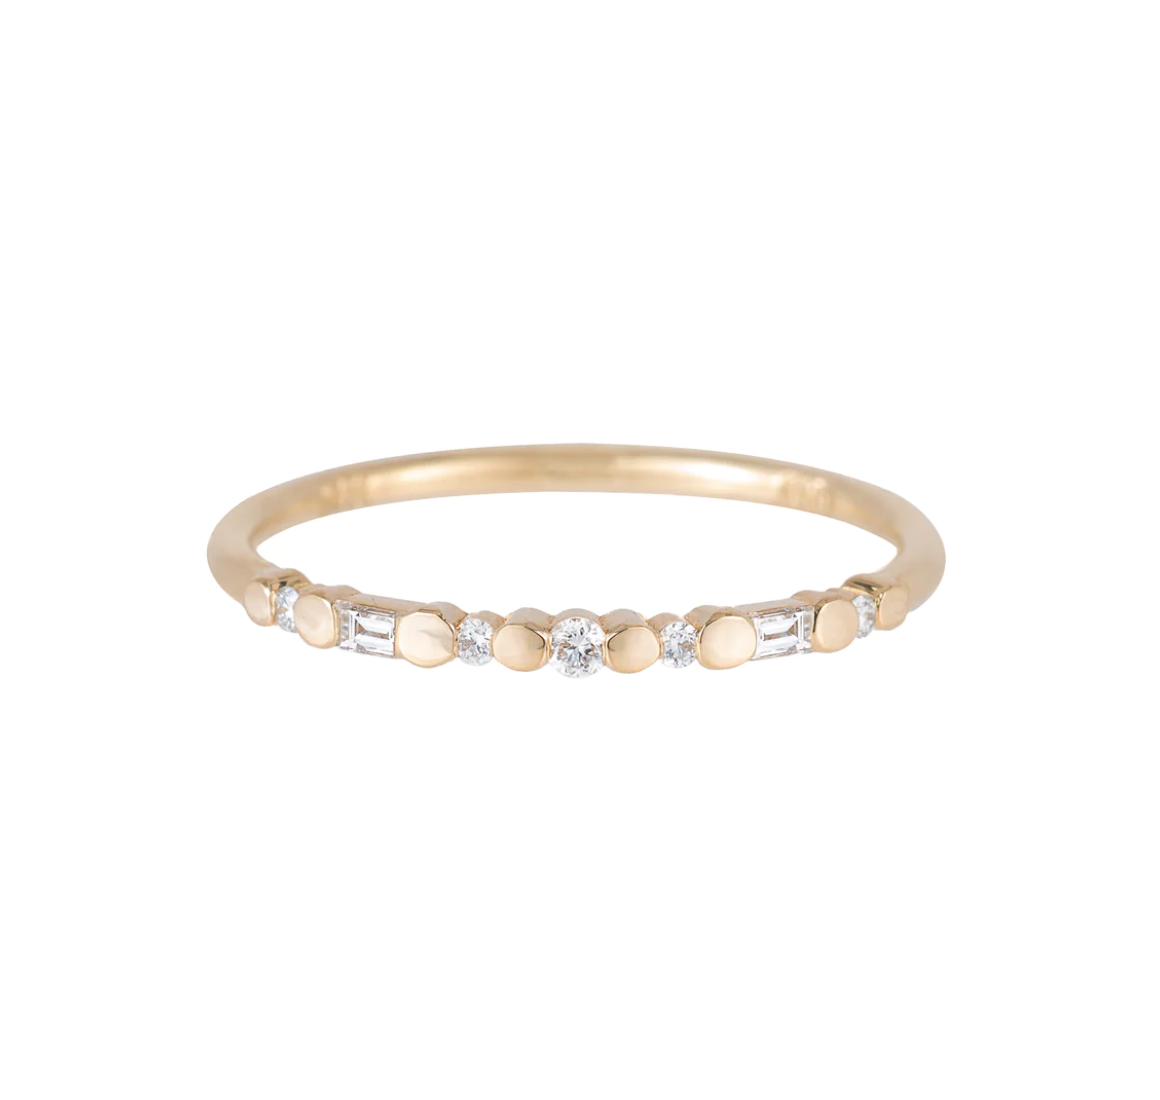 a 14k yellow gold band with round gold details and a mix of baguette and round diamonds on a white background